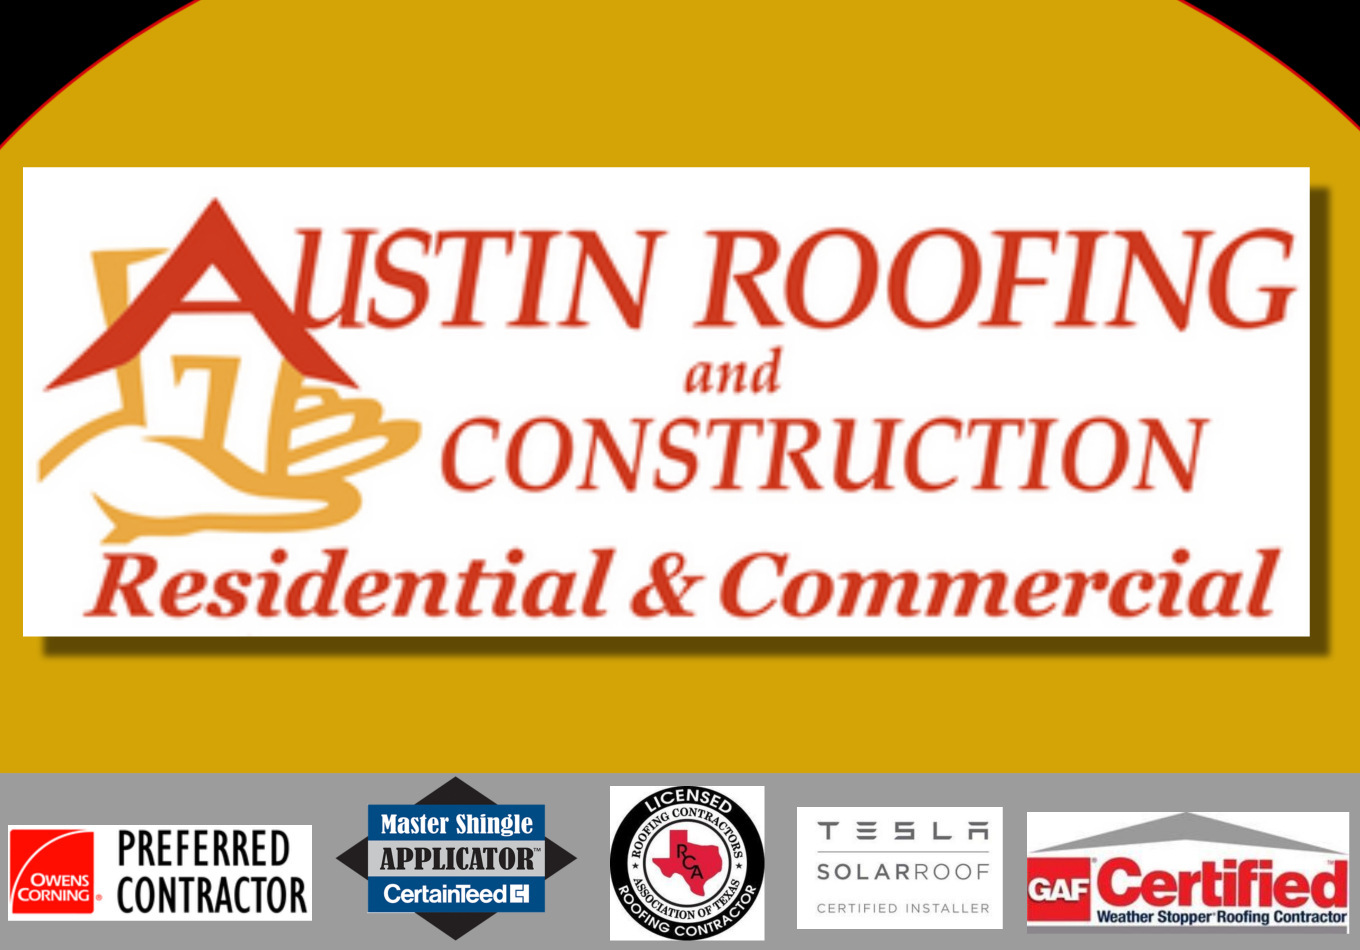 Austin Roofing and Construction, Tuesday, August 31, 2021, Press release picture